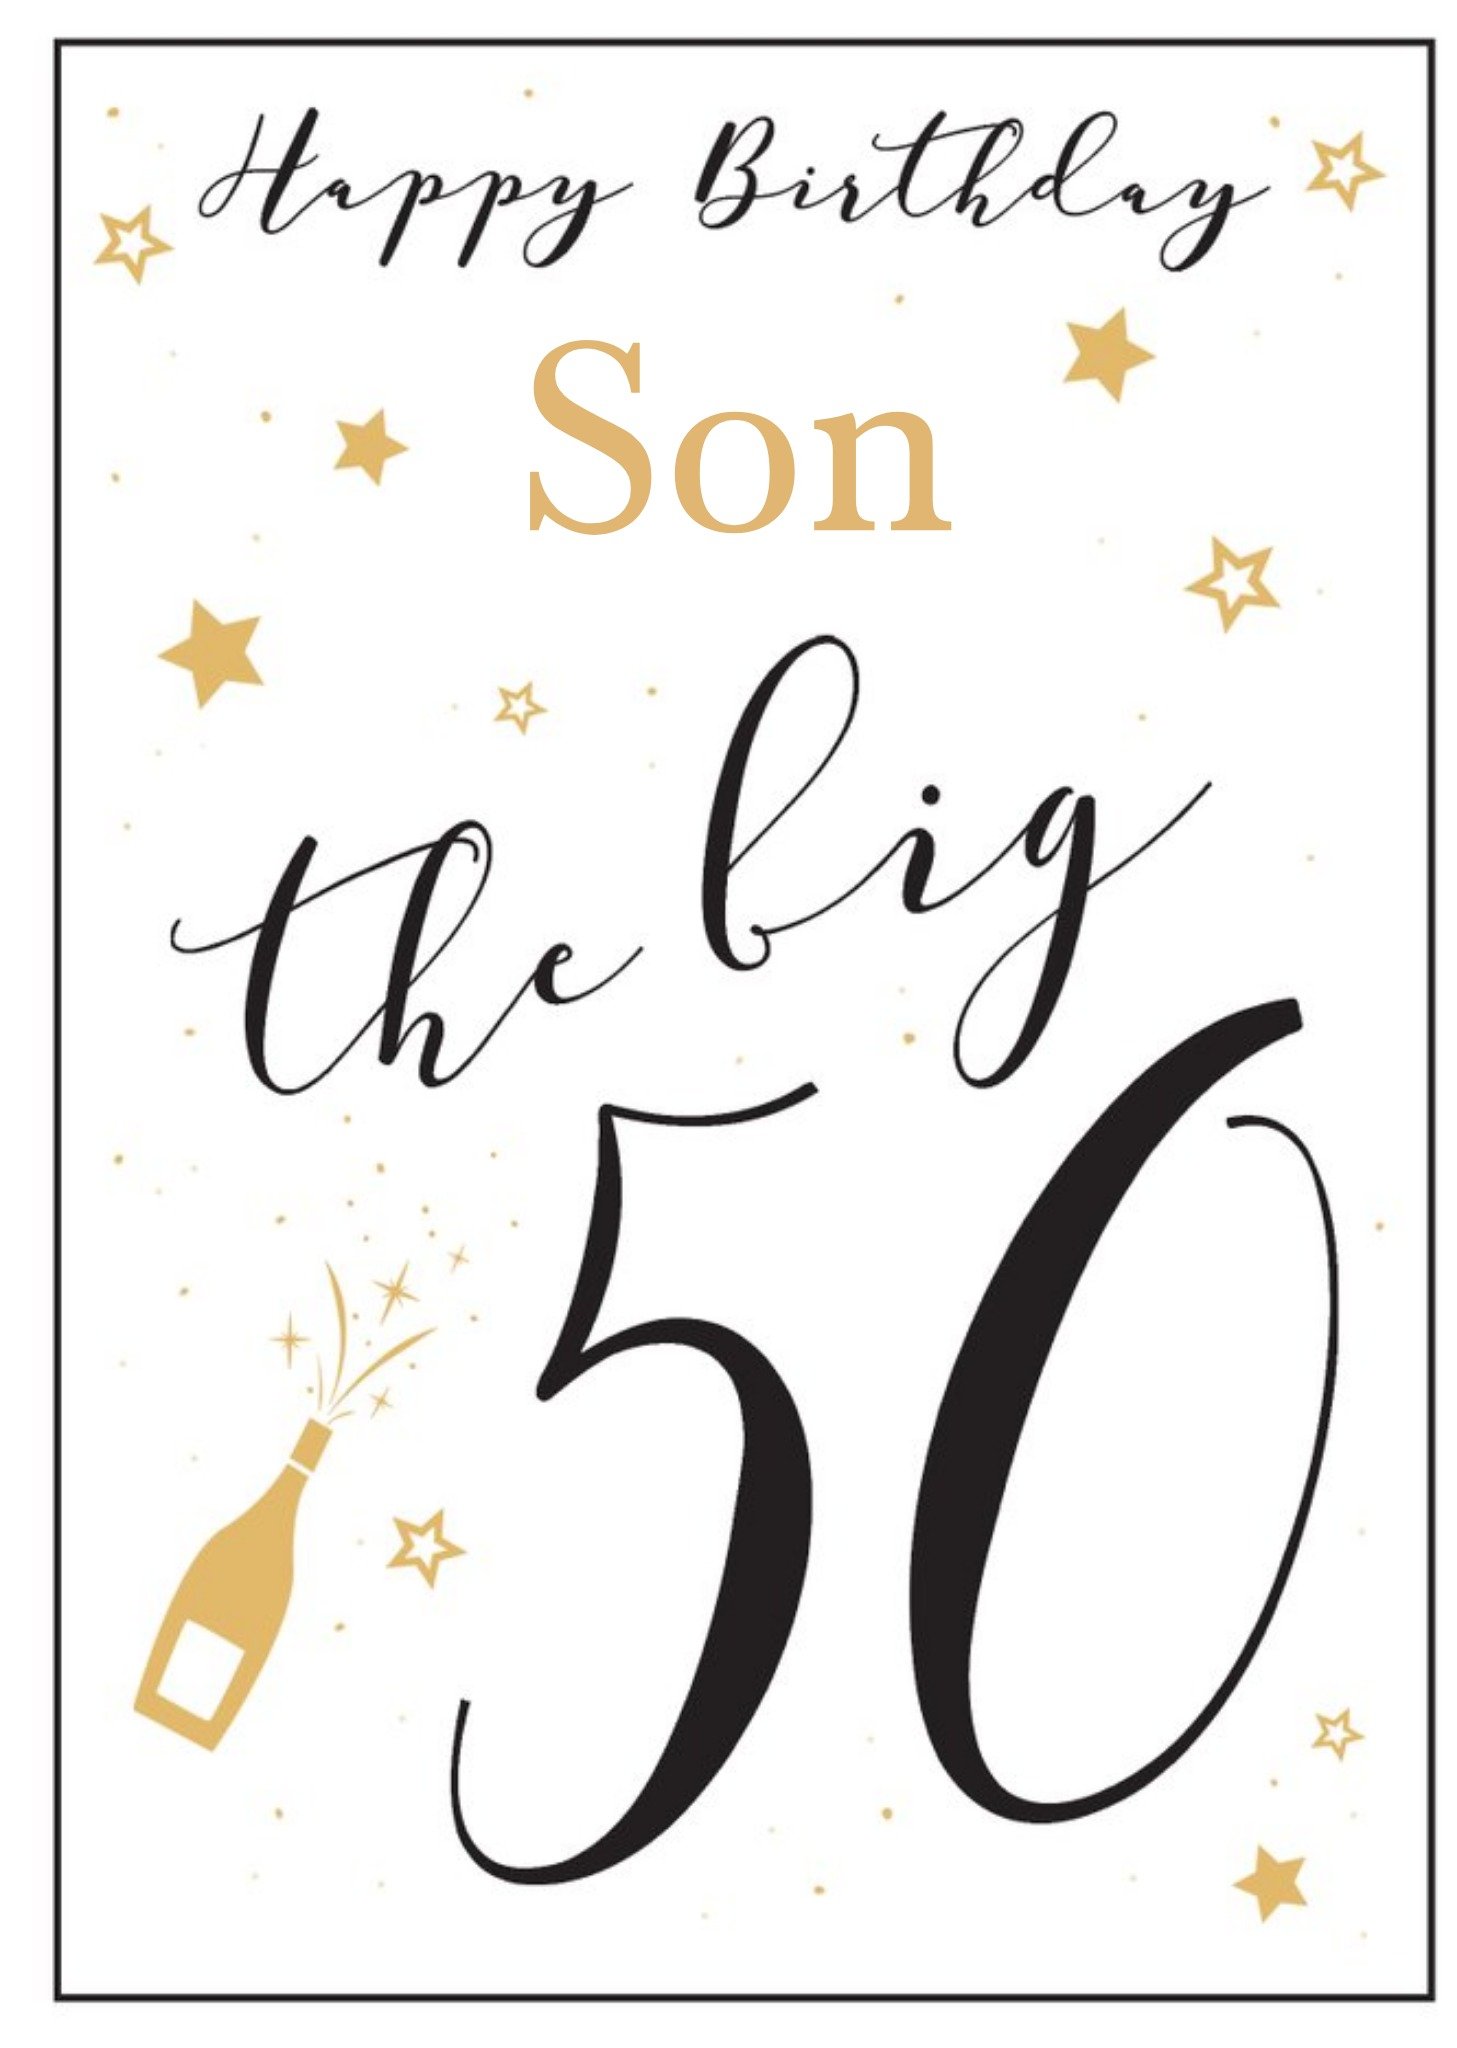 Moonpig Minimalist Black White Gold Big 50 Son Birthday Card From Paperlink, Large